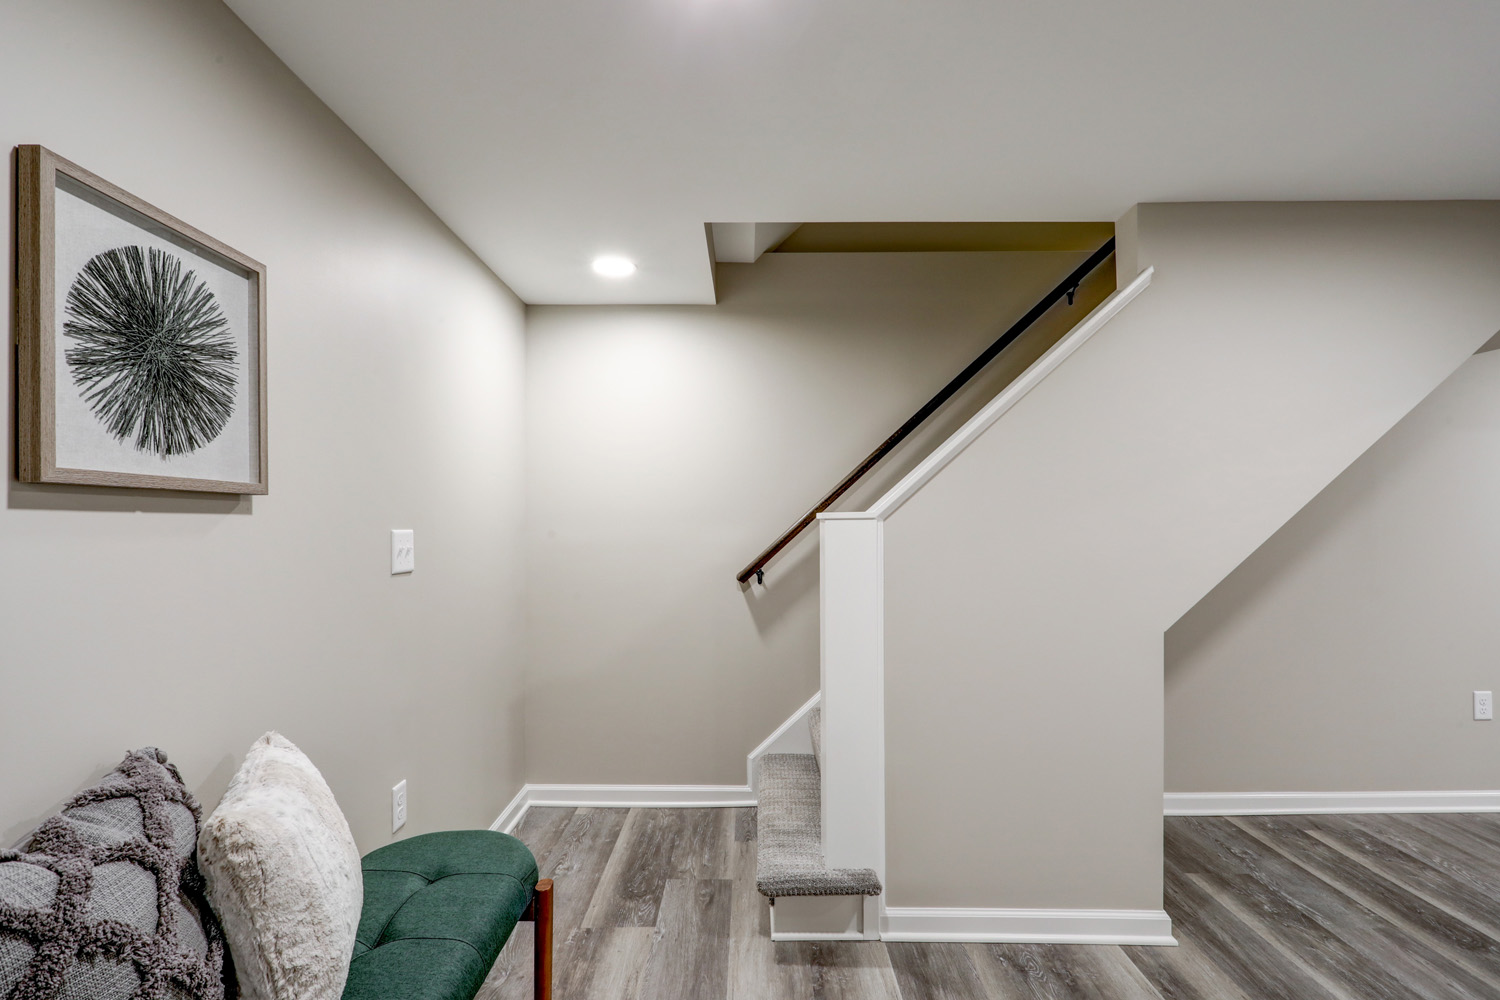 Manheim Township Basement Remodel with updated stairway